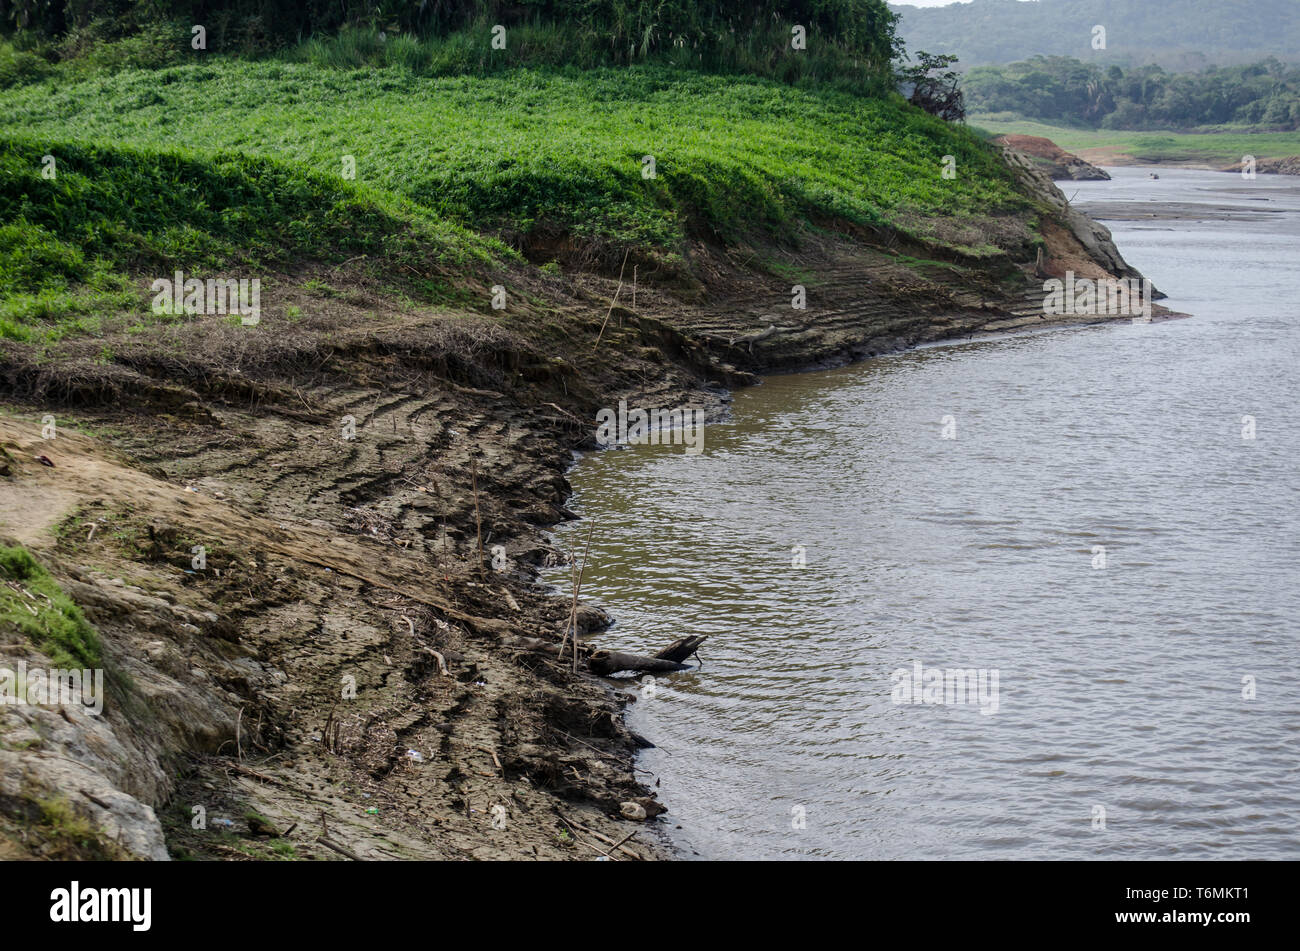 Drought effects are seen in the shores of Lake Alajuela. The water levels is several meters below the expected. Stock Photo